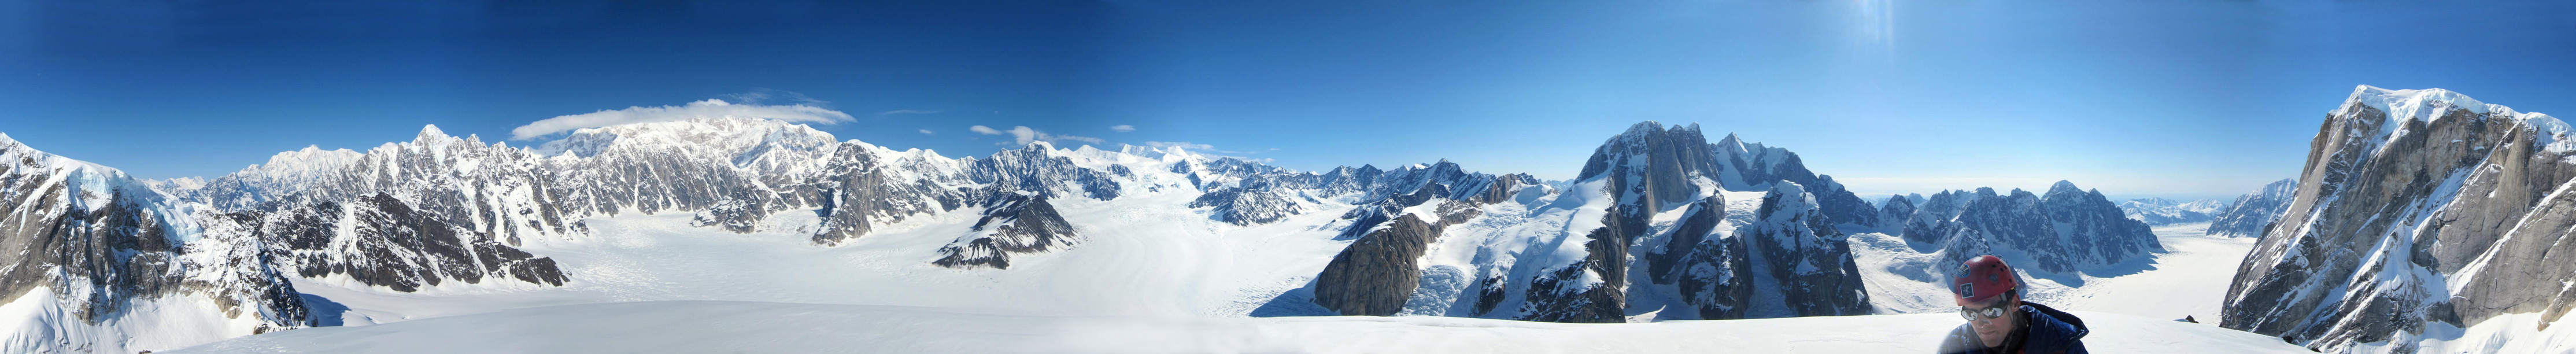 landscape of snowy glaciers and snow-covered, rugged mountains